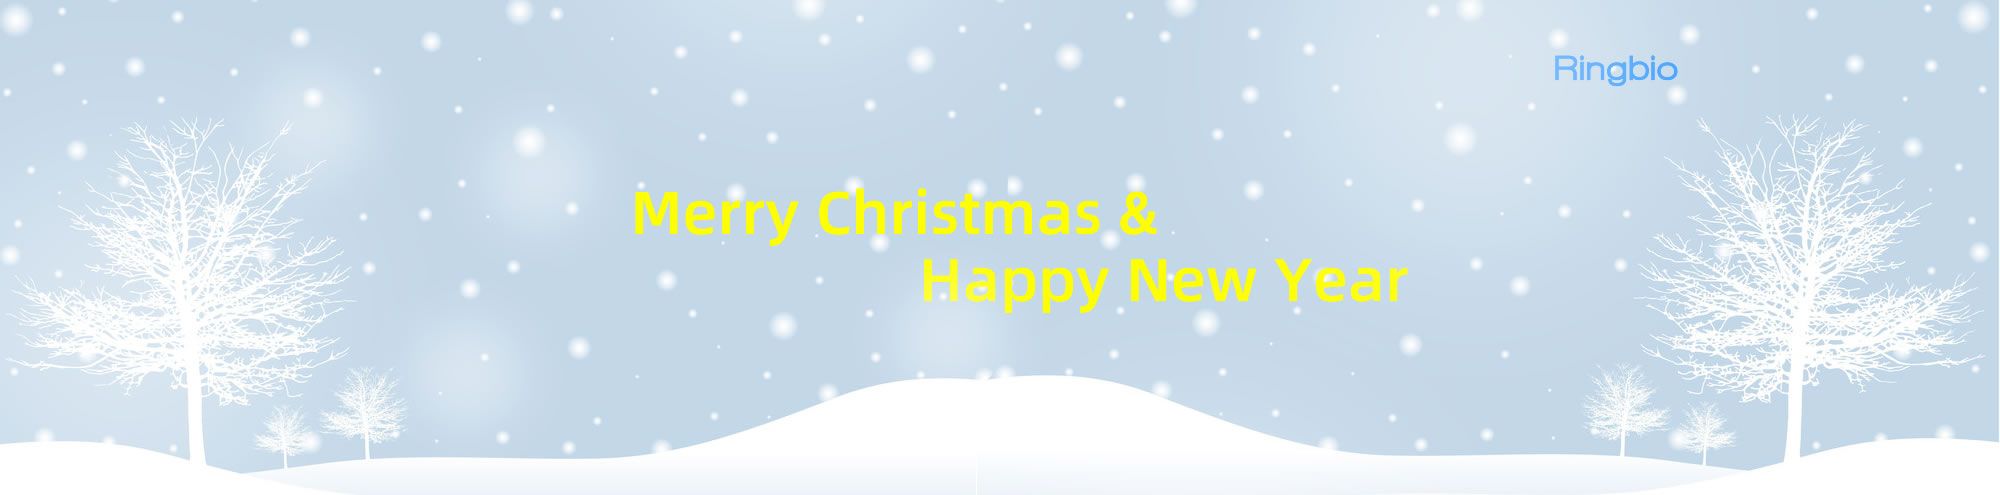 Ringbio wish you a Merry Christmas and Happy New Year